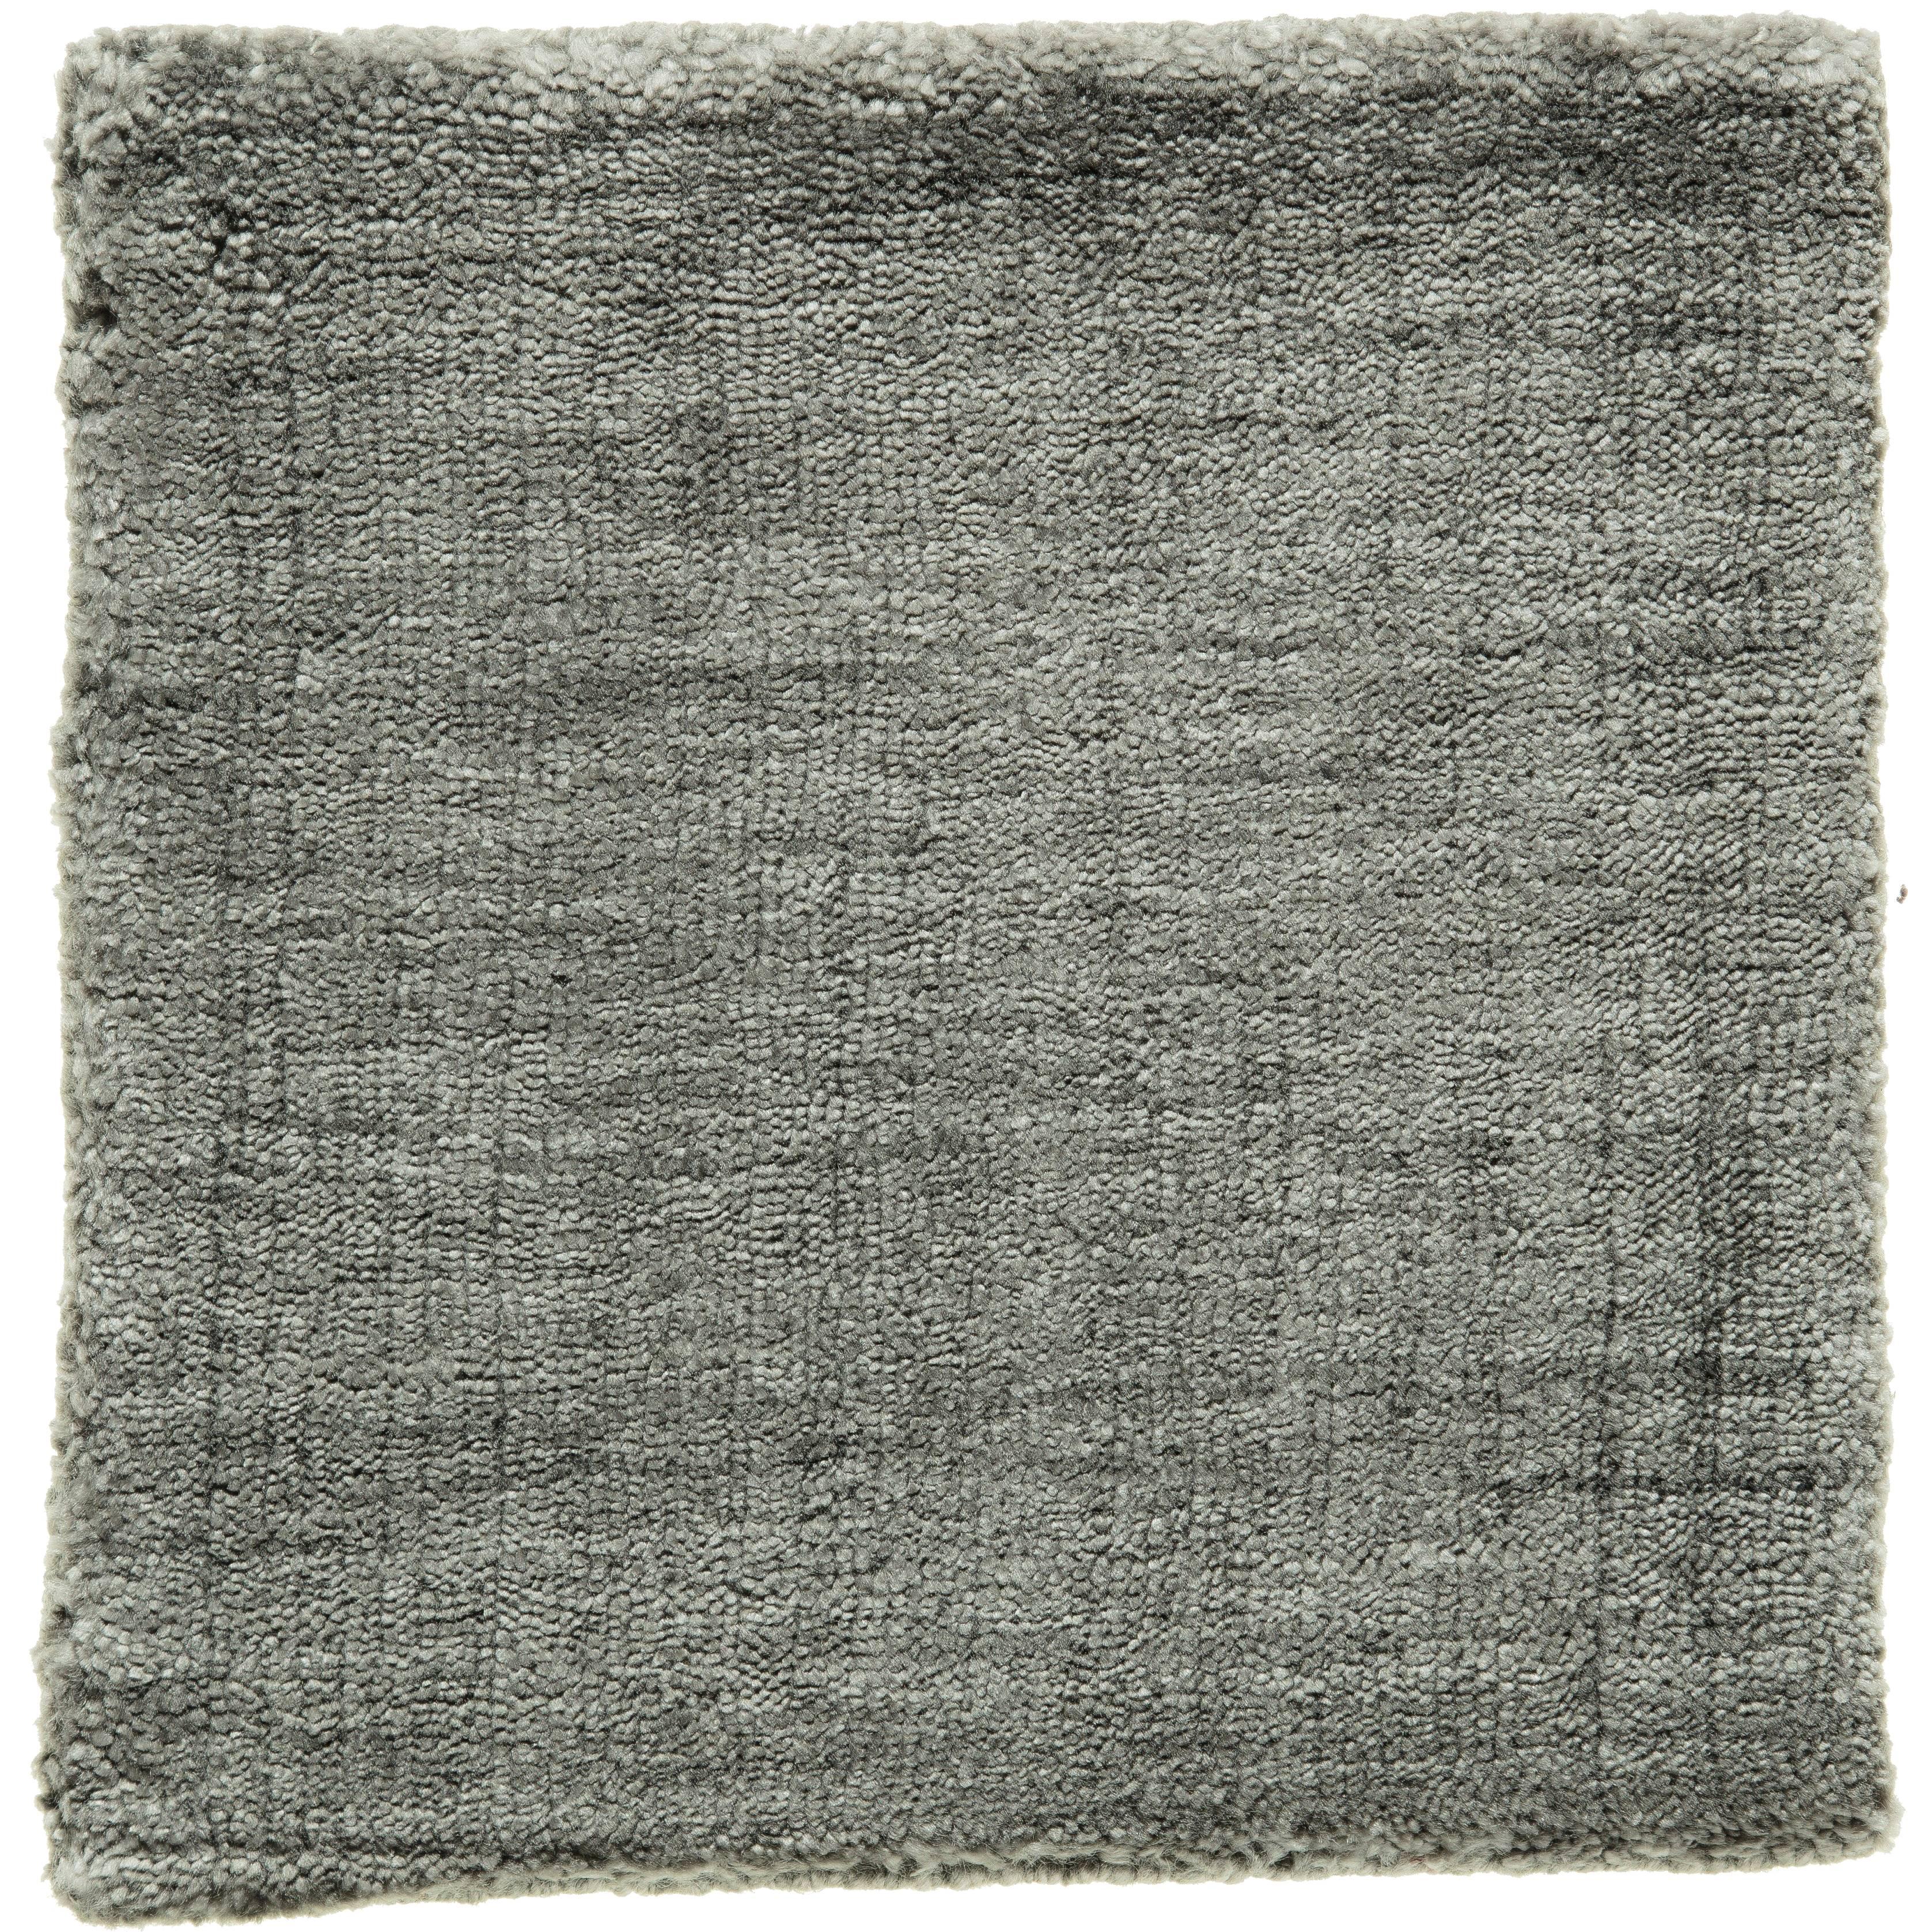 Neutral Grey Rug Hand-Loomed Bamboo Silk Solid Neutral Rug in Any Custom Size For Sale